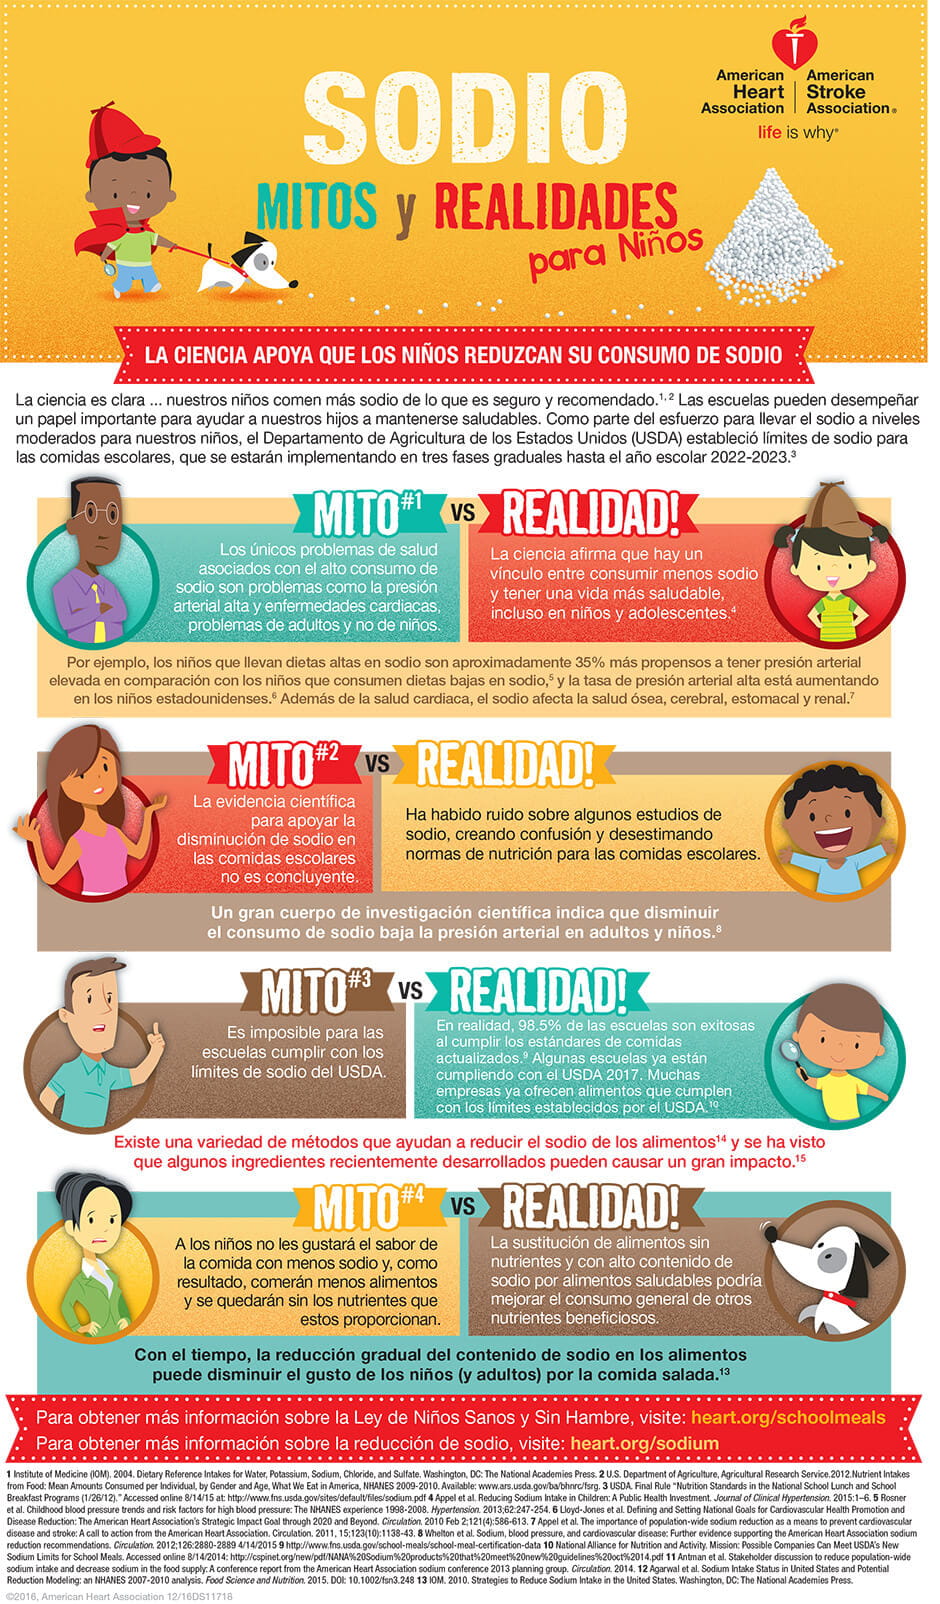 Sodium myths and facts for kids in Spanish